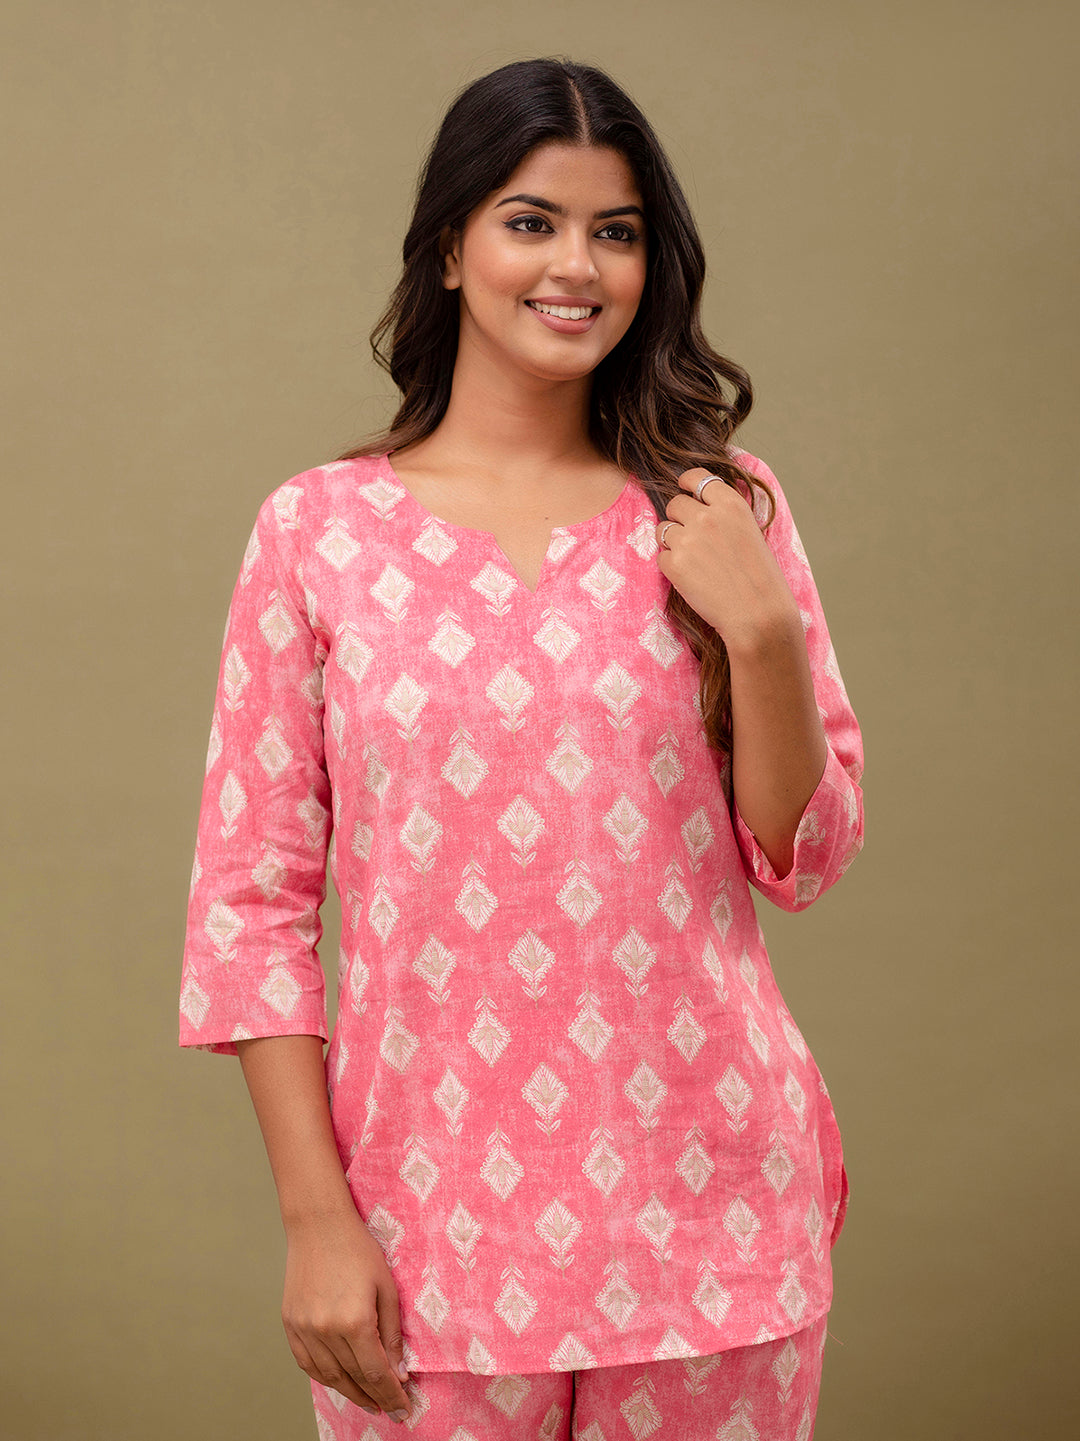 Floral Printed Pure Cotton Night Suits FRLW9044